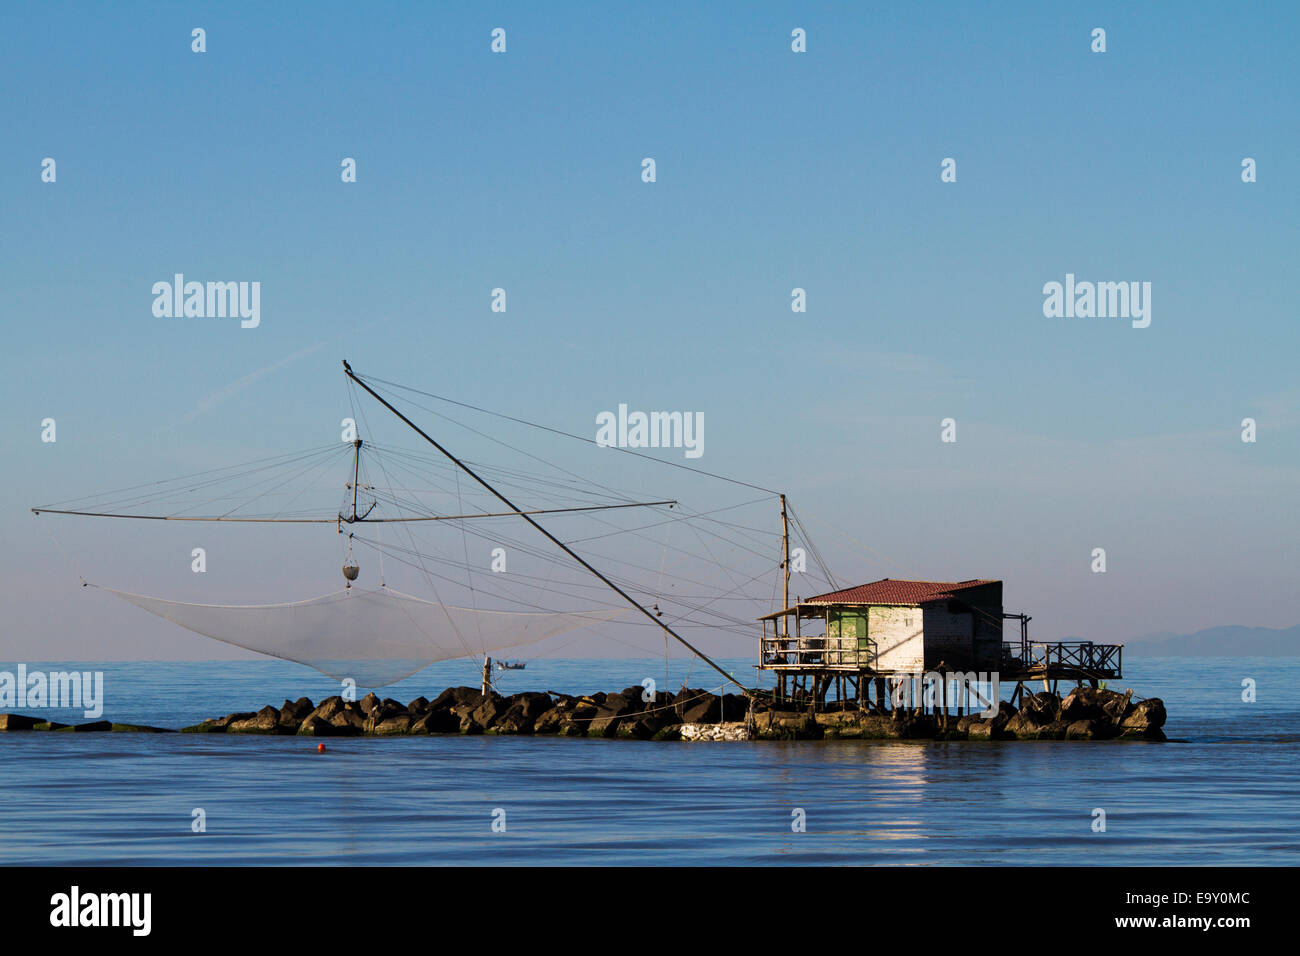 Fisherman's house with a net over the sea in Marina di Pisa, Tuscany, Italy Stock Photo